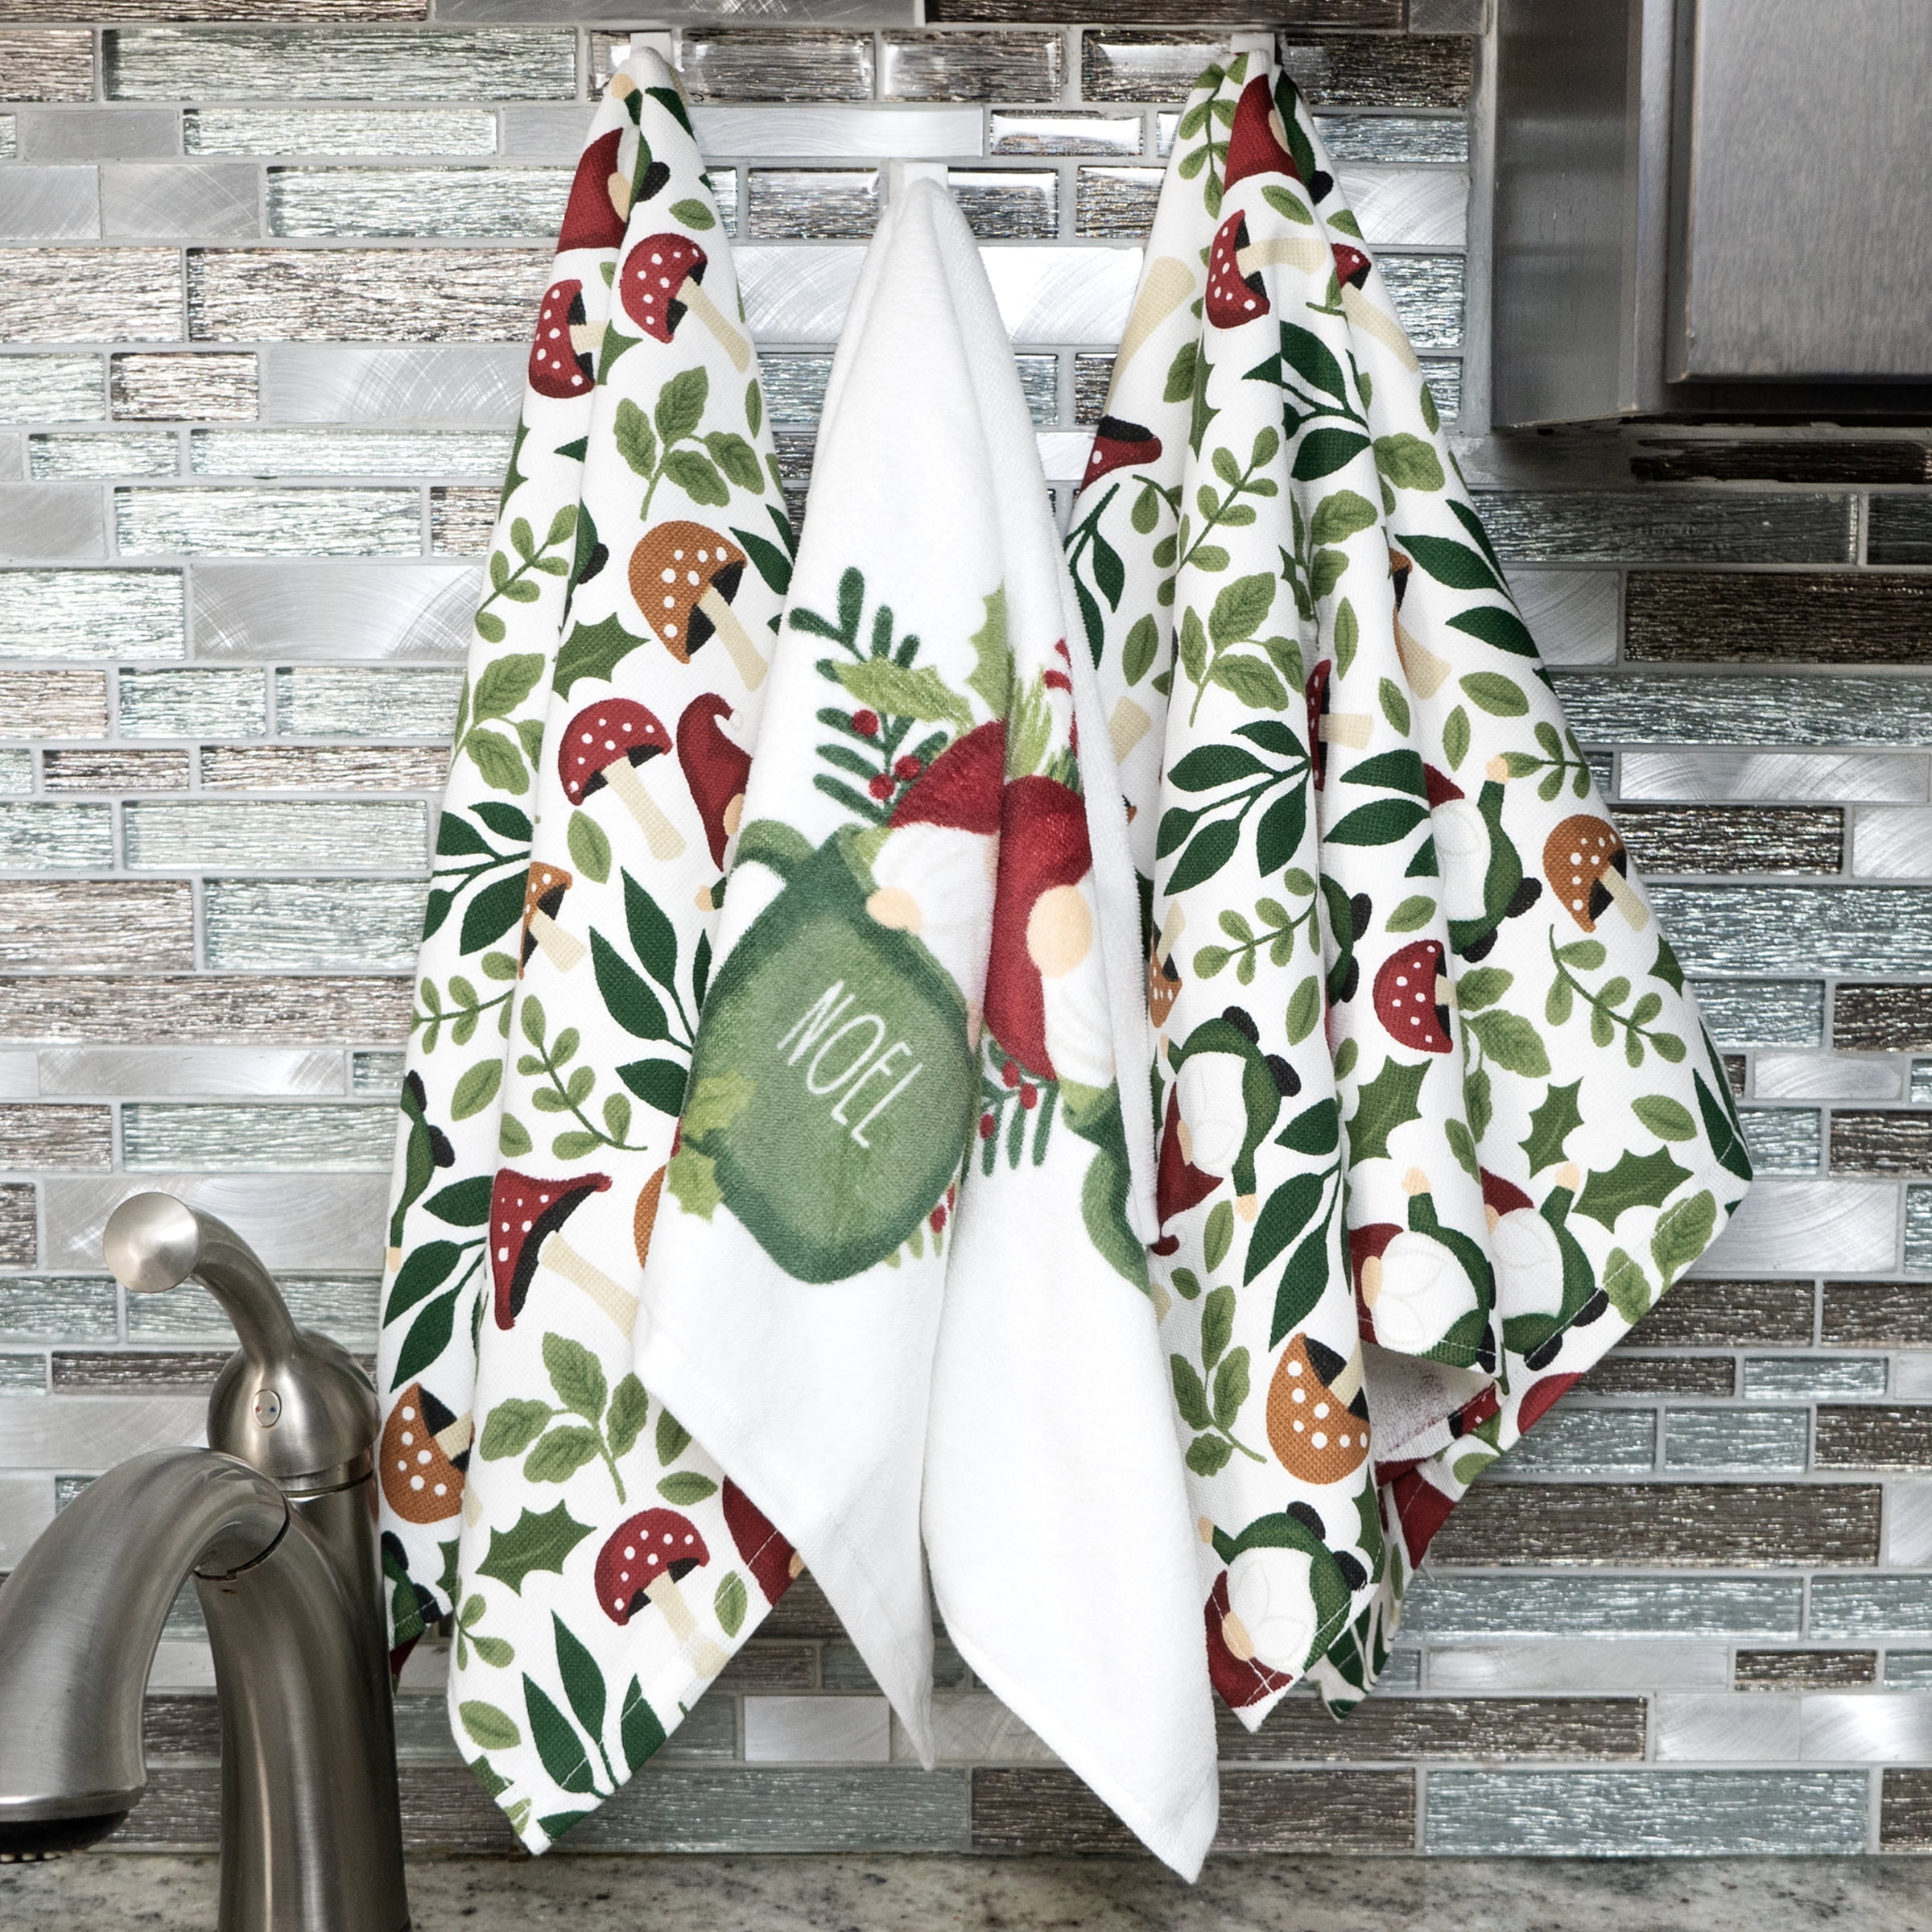 Rae Dunn Kitchen Towels 3 Pack